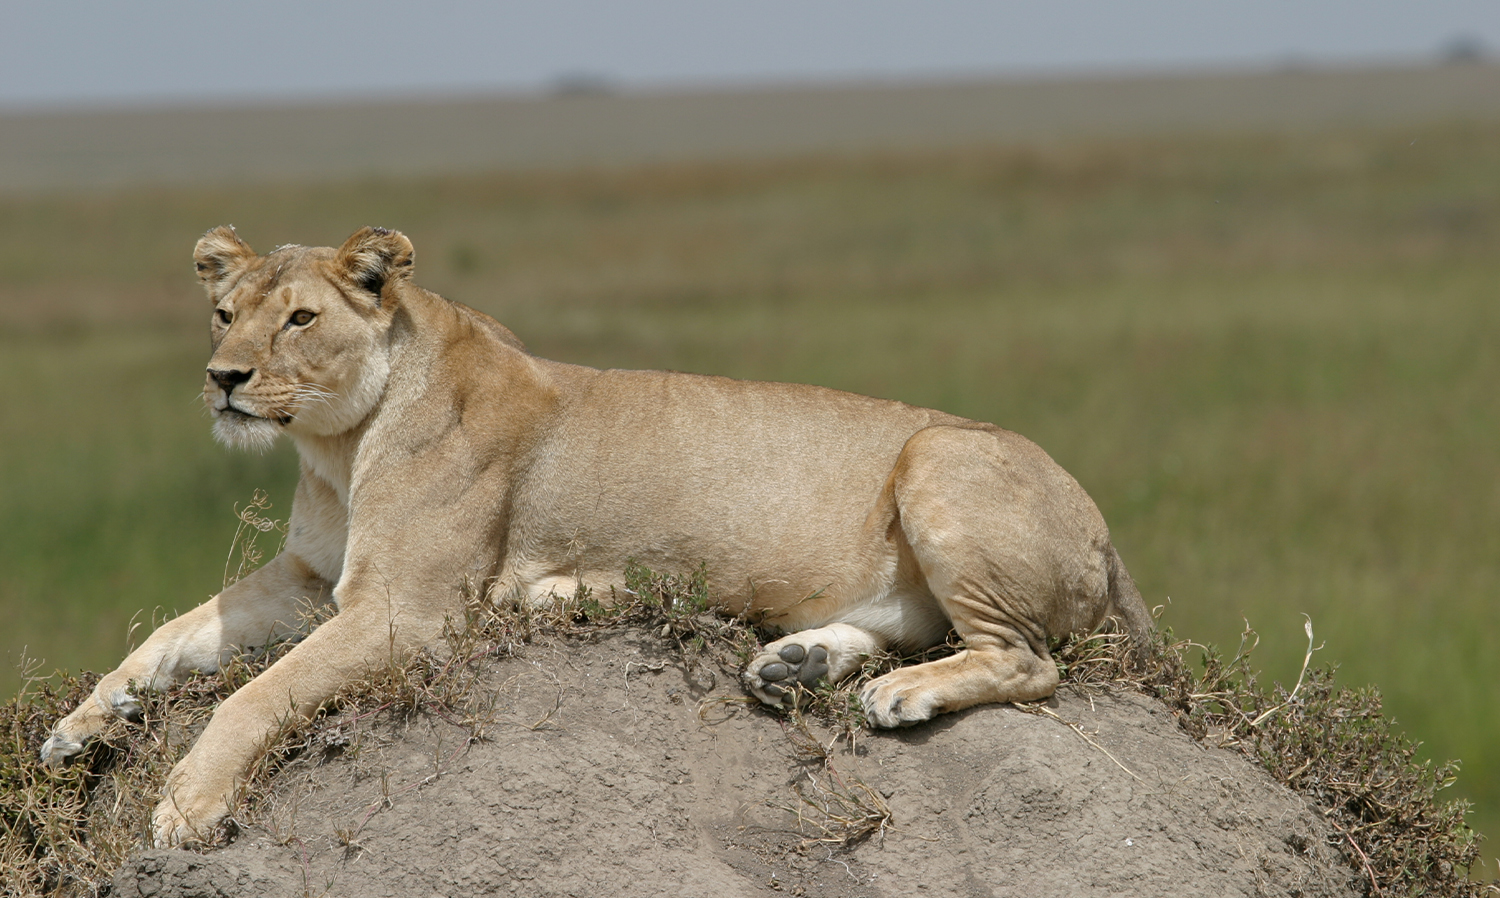 Lioness on her perch